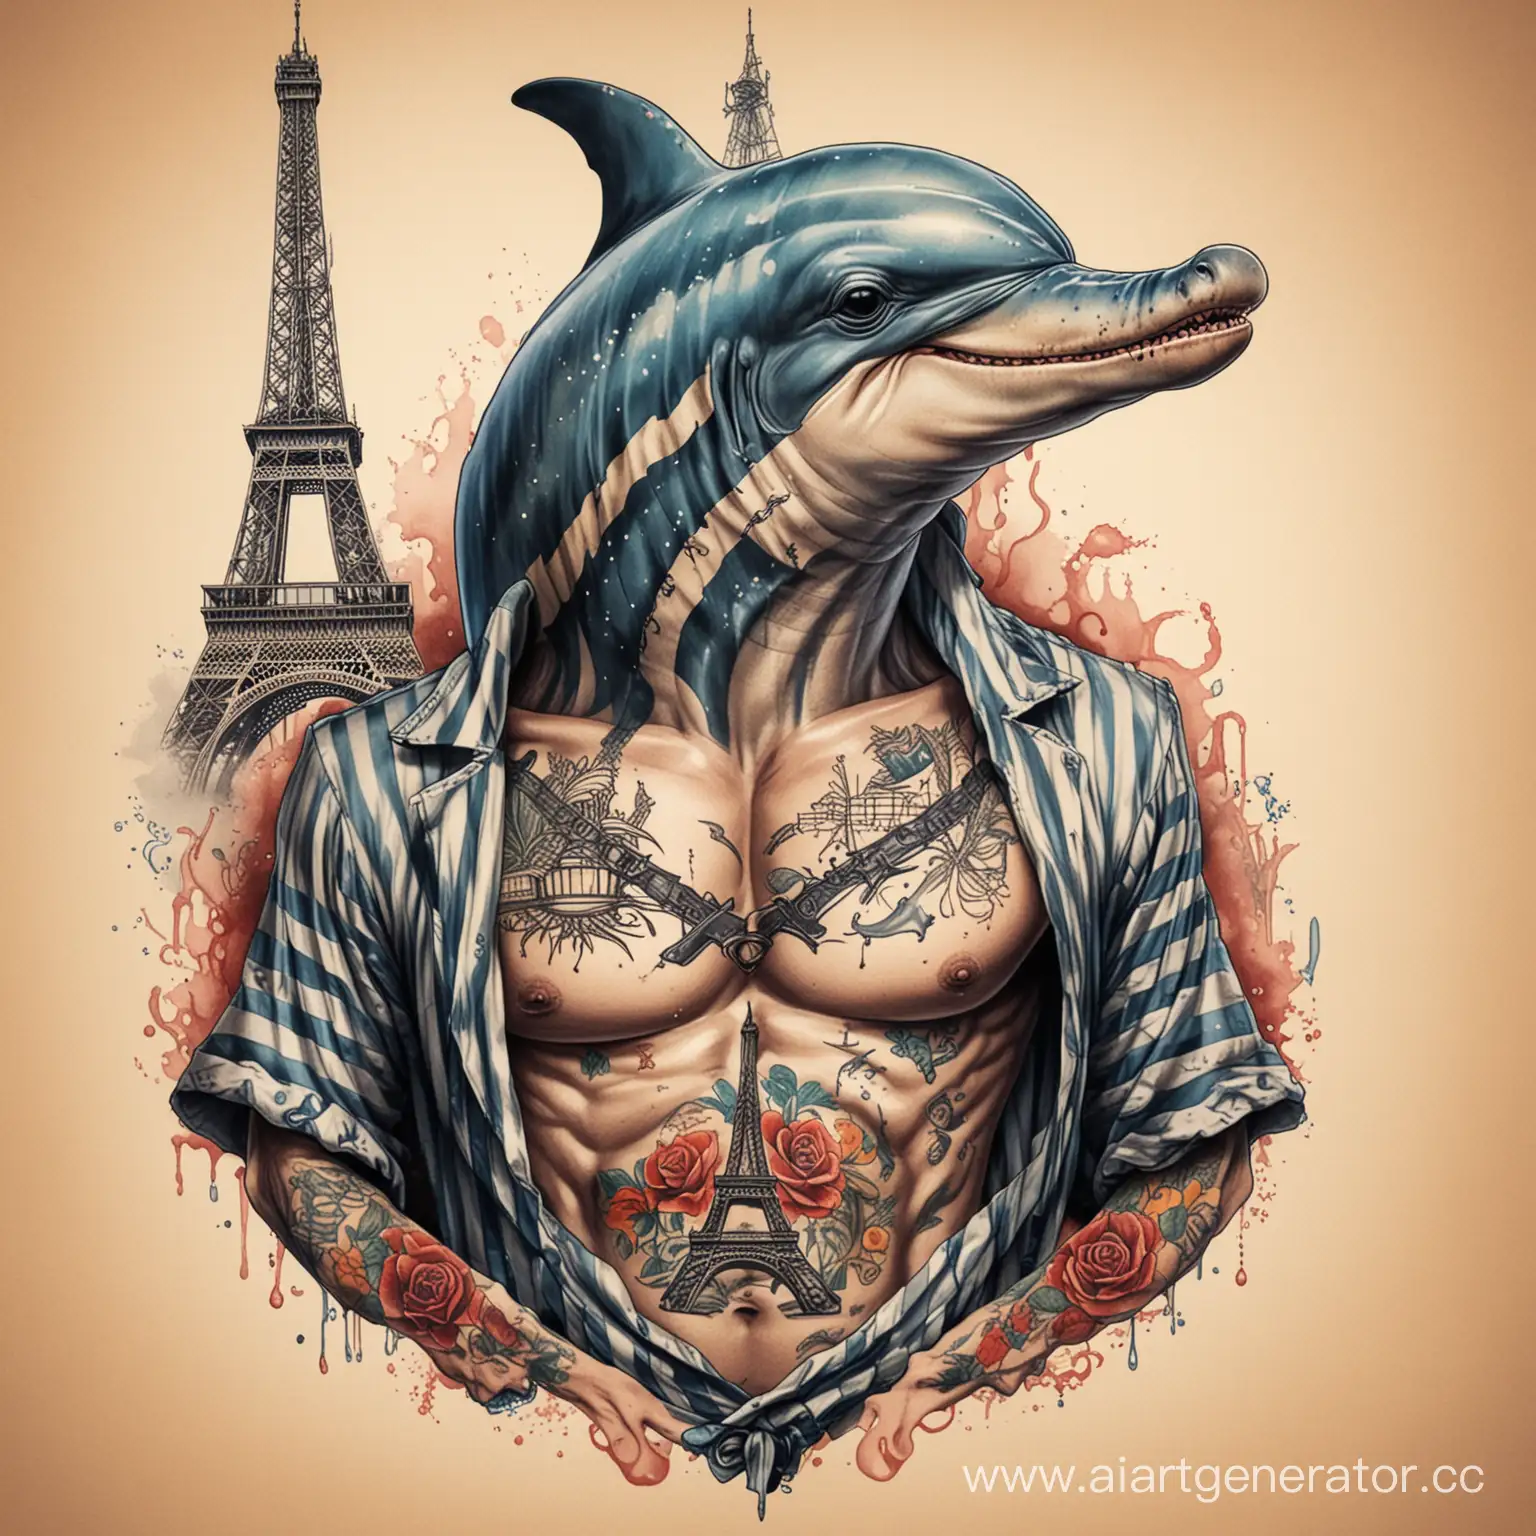 Dolphin-with-Eiffel-Tower-Tattoo-Ripping-Striped-Robe-in-Old-School-Tattoo-Style